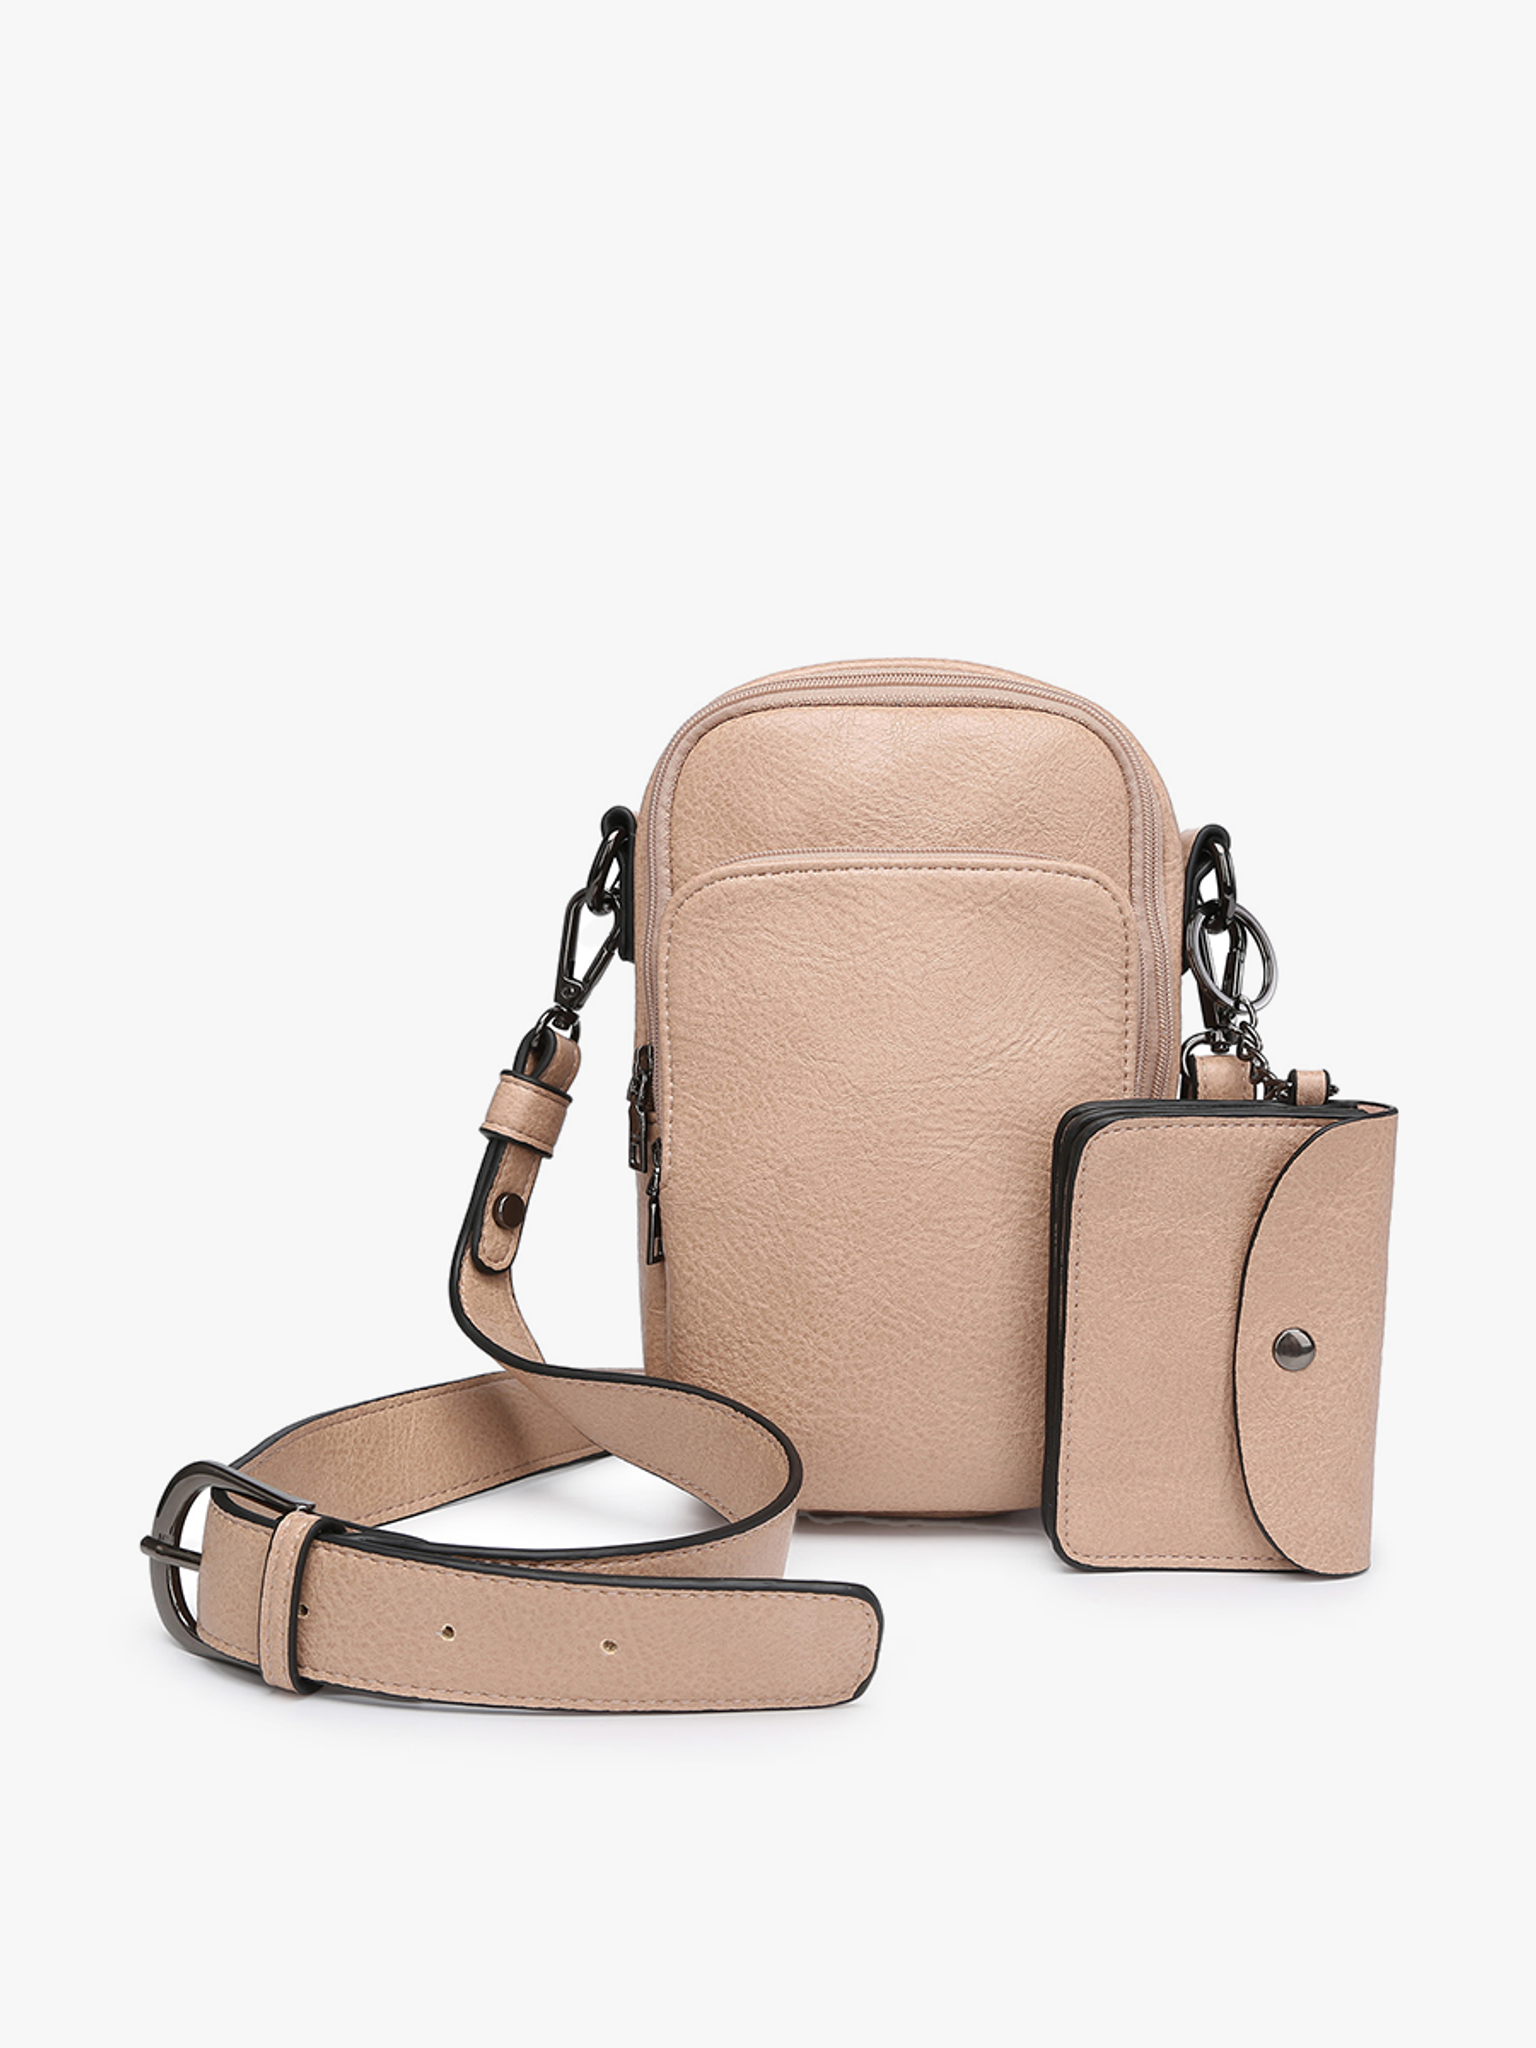 Parker Crossbody with Pouch-accessories > Apparel & Accessories > Handbags, Wallets & Cases > Handbags-Quinn's Mercantile